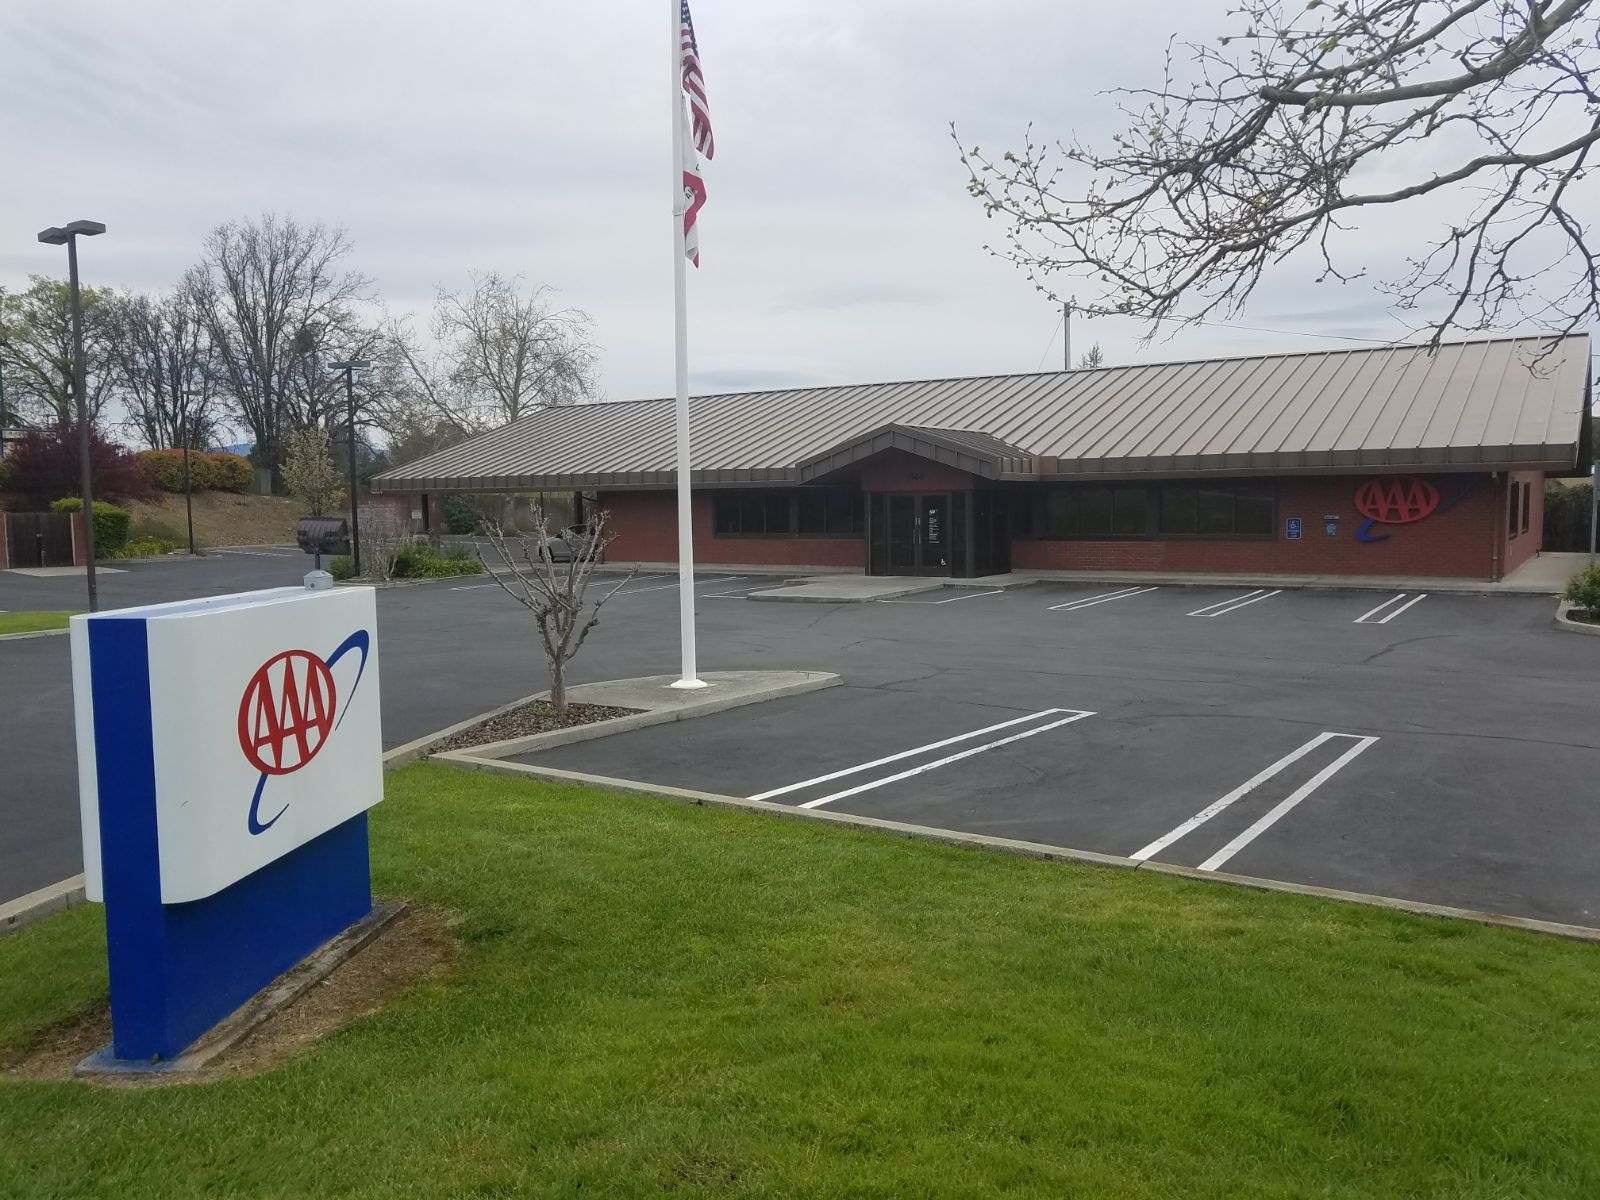 AAA Insurance 1464 Parallel Dr, Lakeport, CA 95453